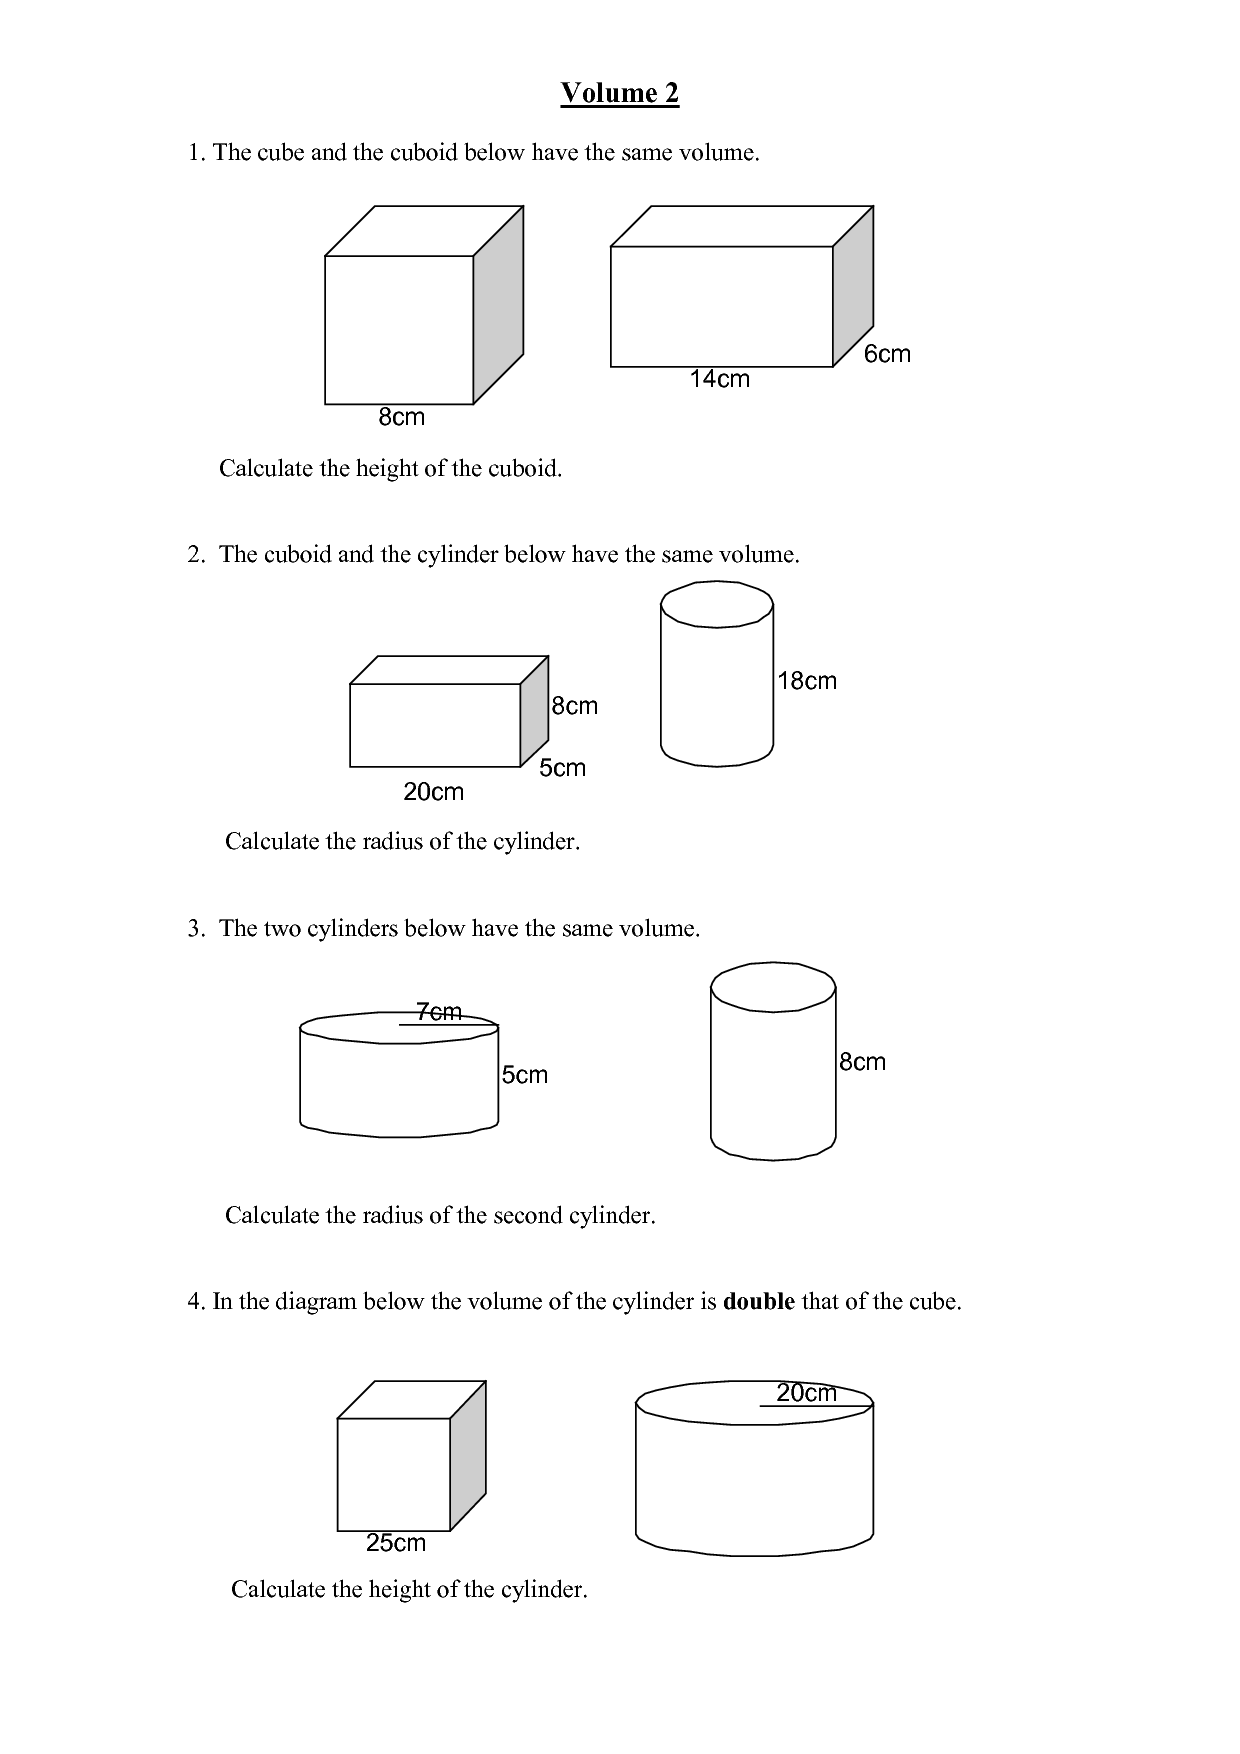 16 Best Images of Volume And Capacity Worksheets Rectangular Prism  Rectangular Prism Volume 